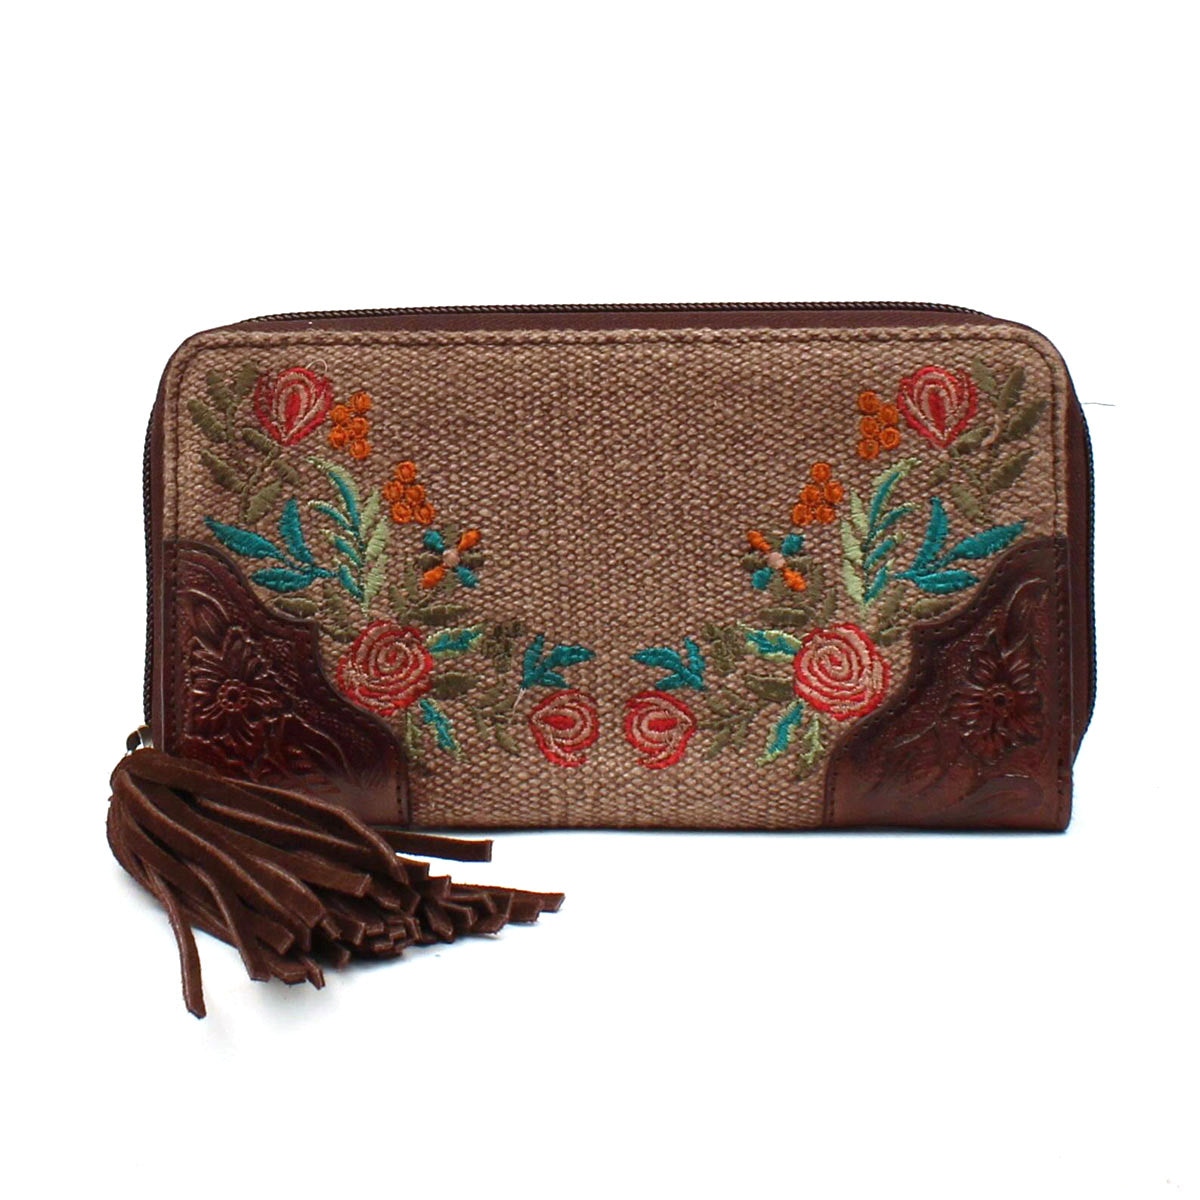 Ariat Audrey Embroidered Clutch